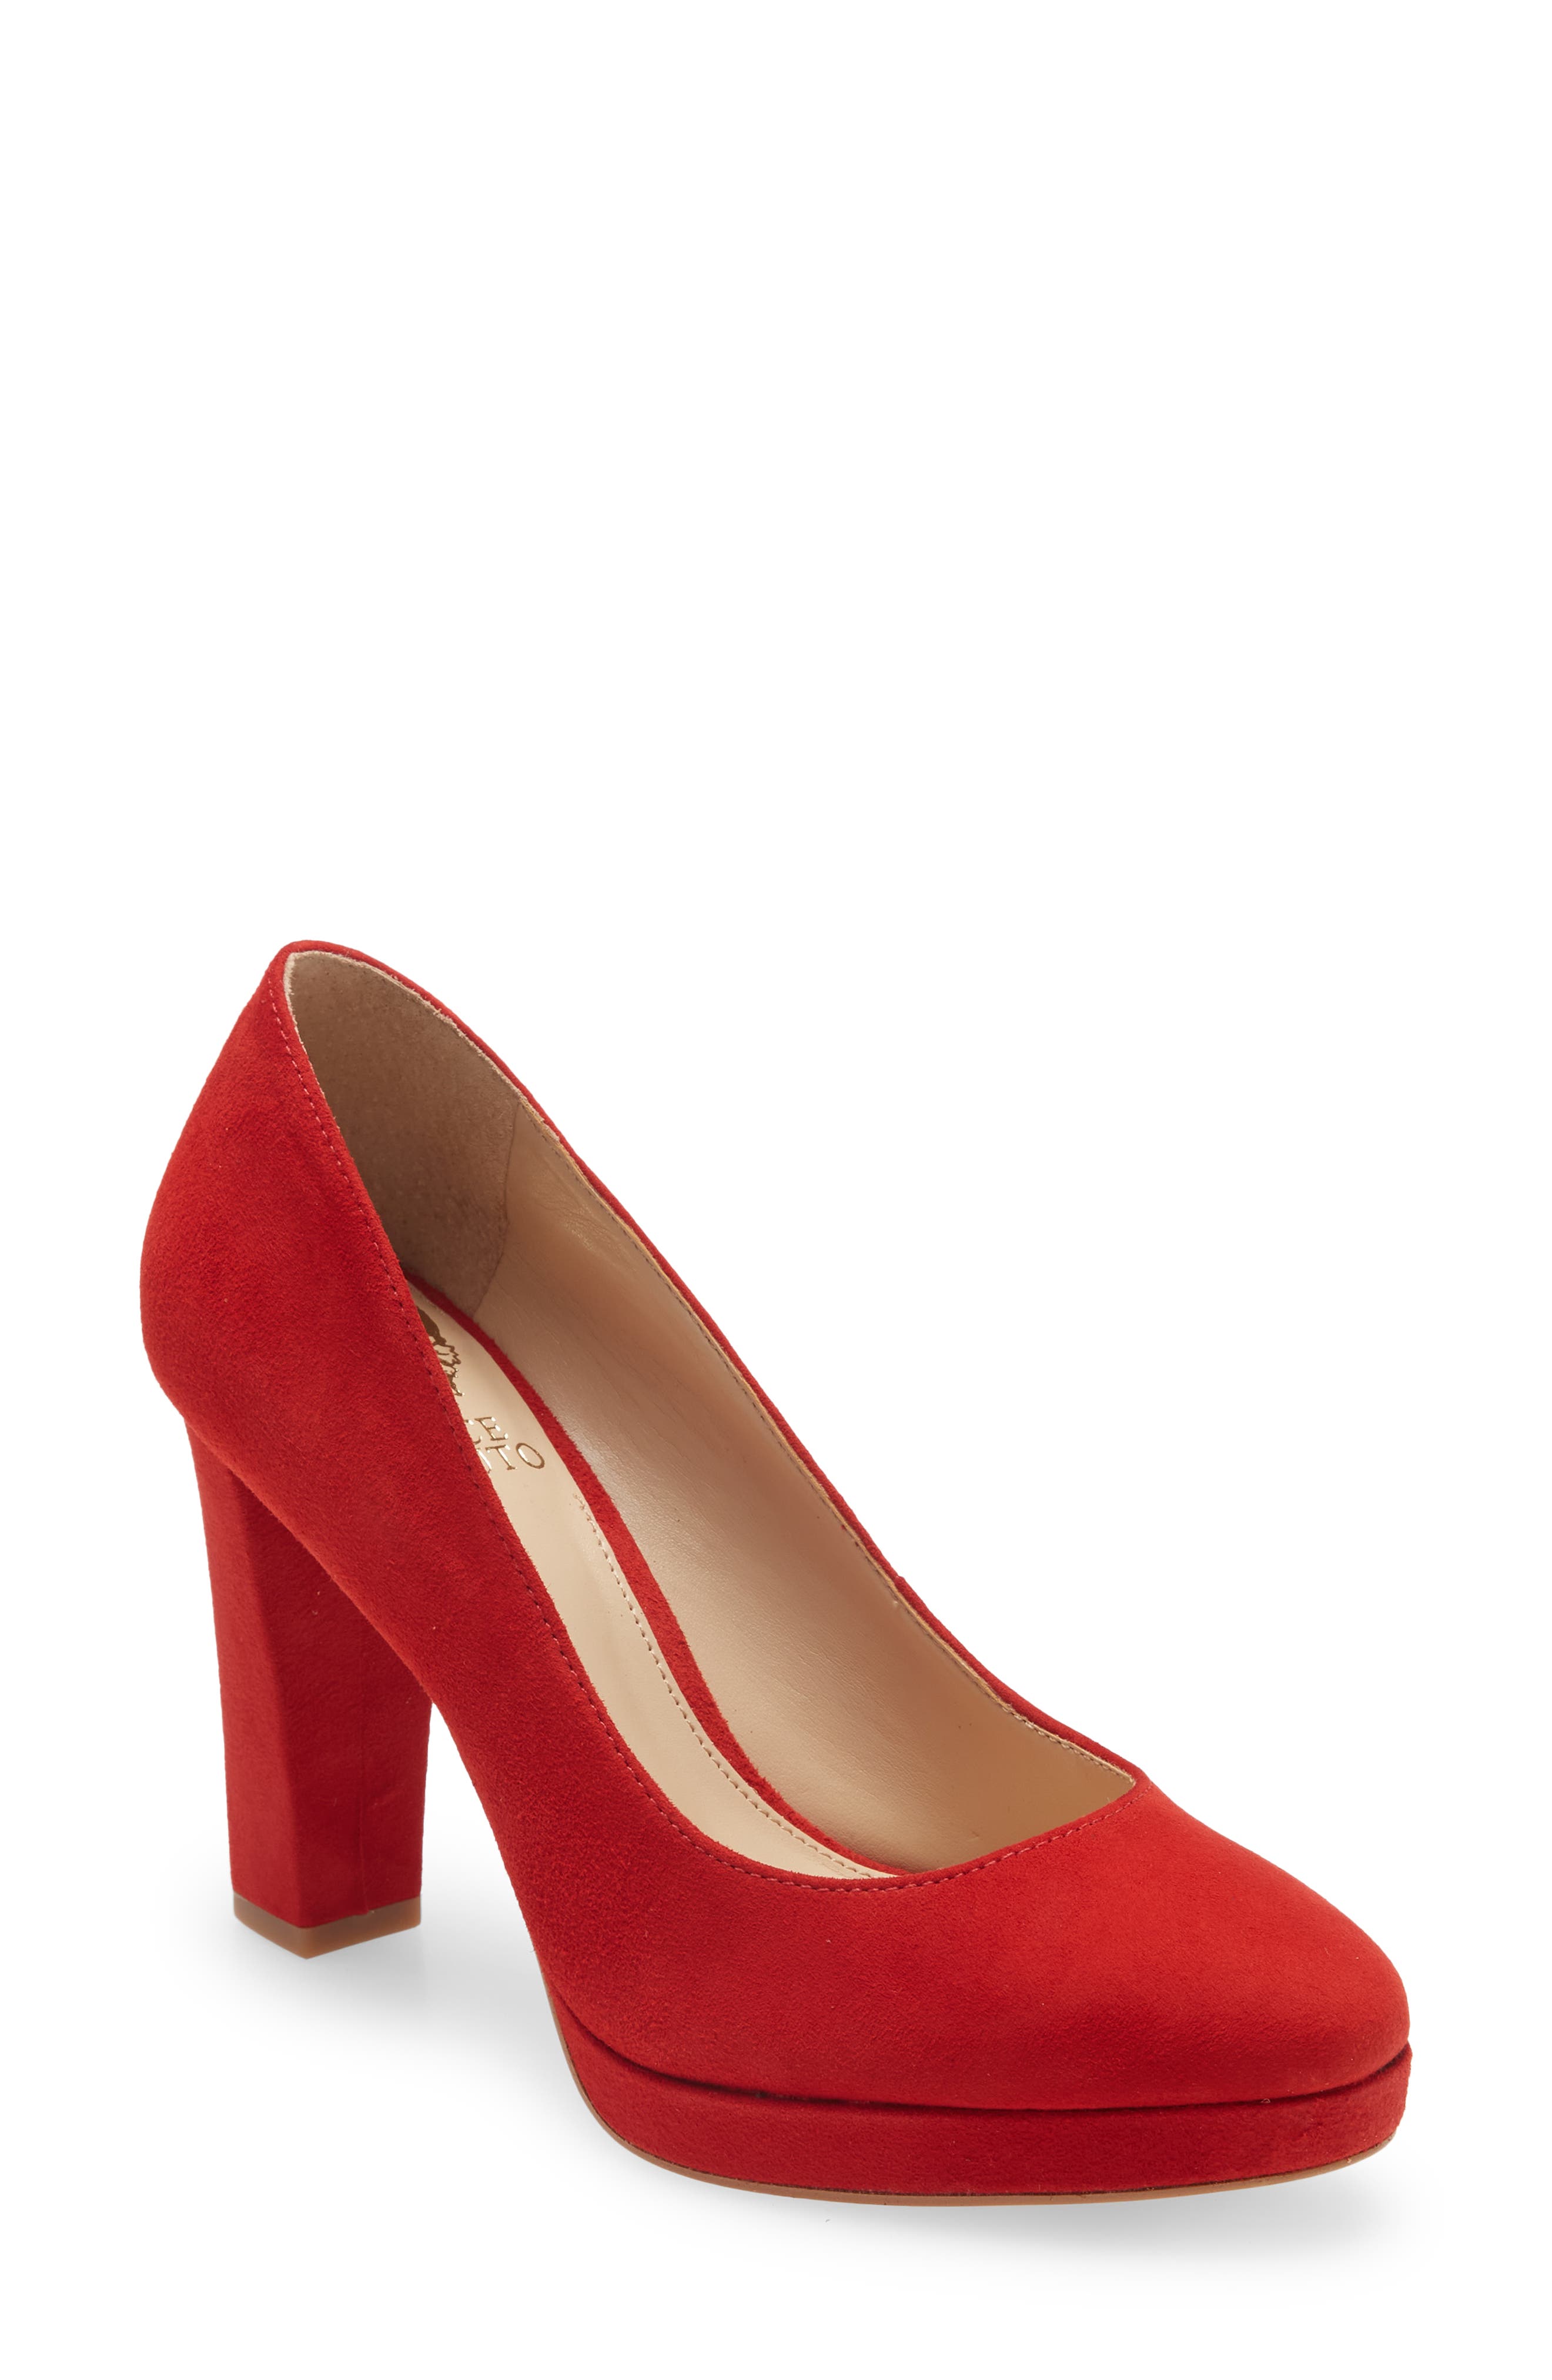 UPC 191707345782 product image for Vince Camuto Halria Pump in Cherry Berry True Suede at Nordstrom, Size 7 | upcitemdb.com